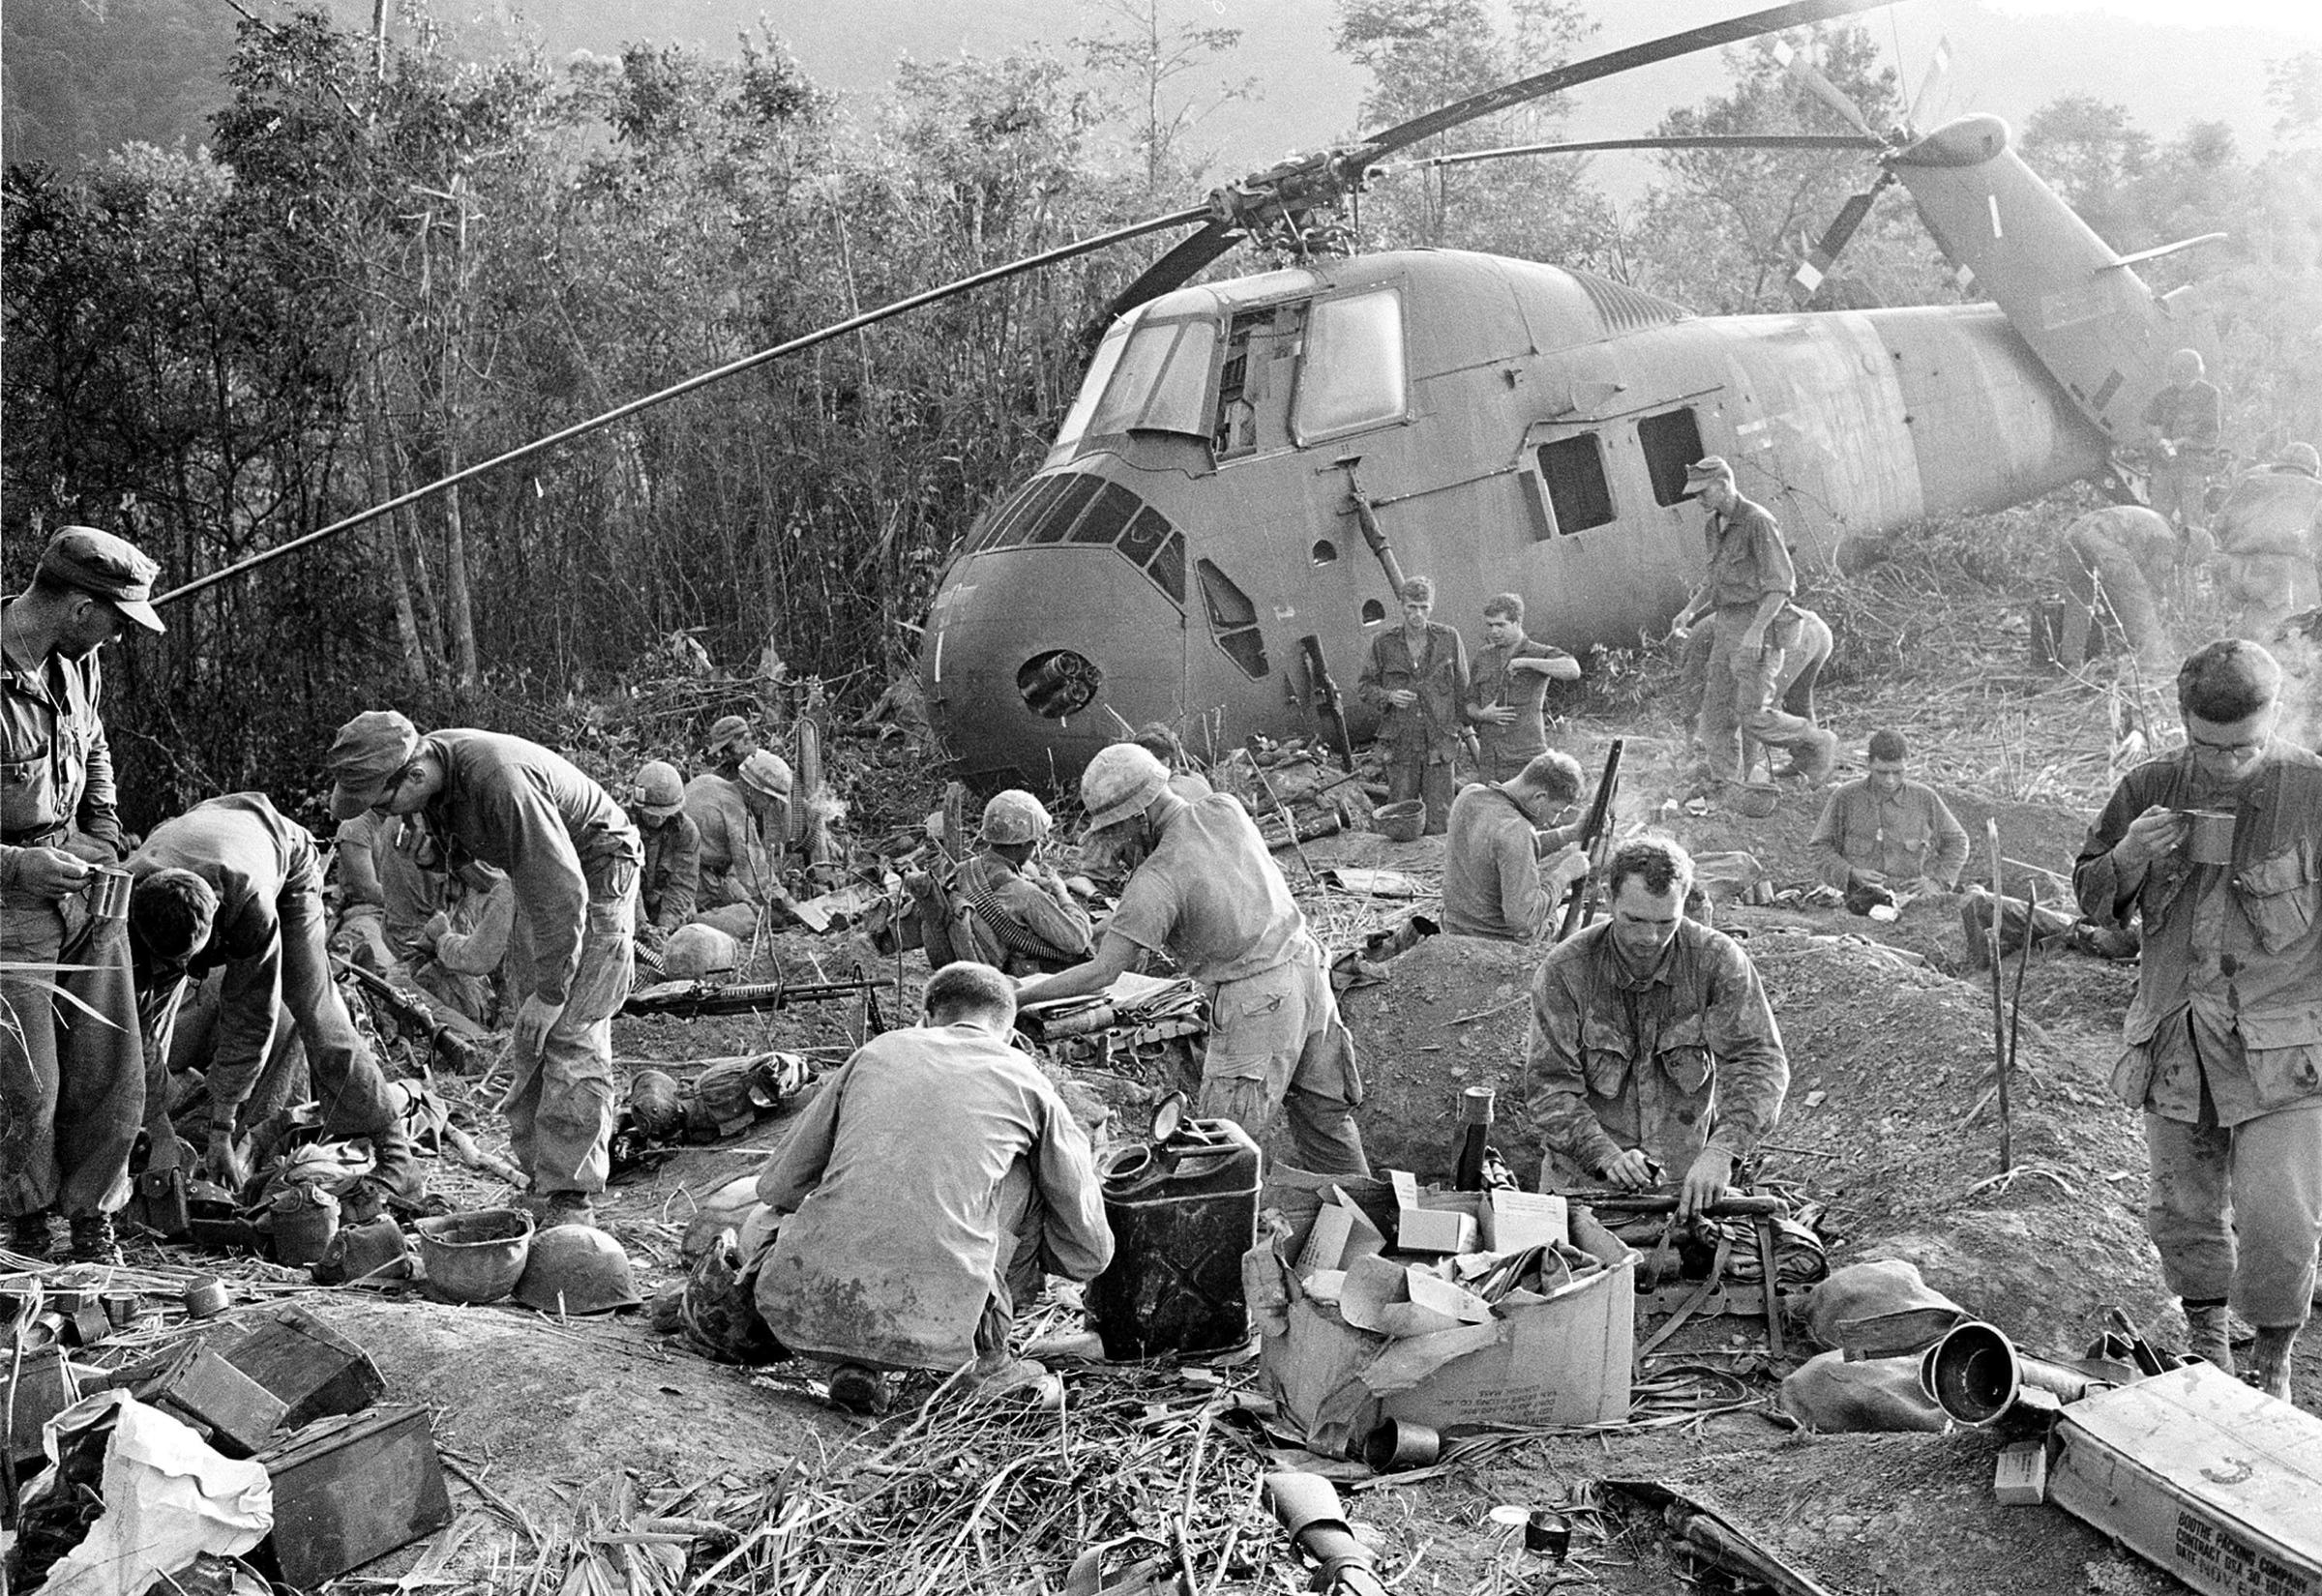 U.S. Marines emerge from muddy foxholes after a third night of fighting against of NVA 324 B division troops during the Vietnam War on Sept. 21, 1966